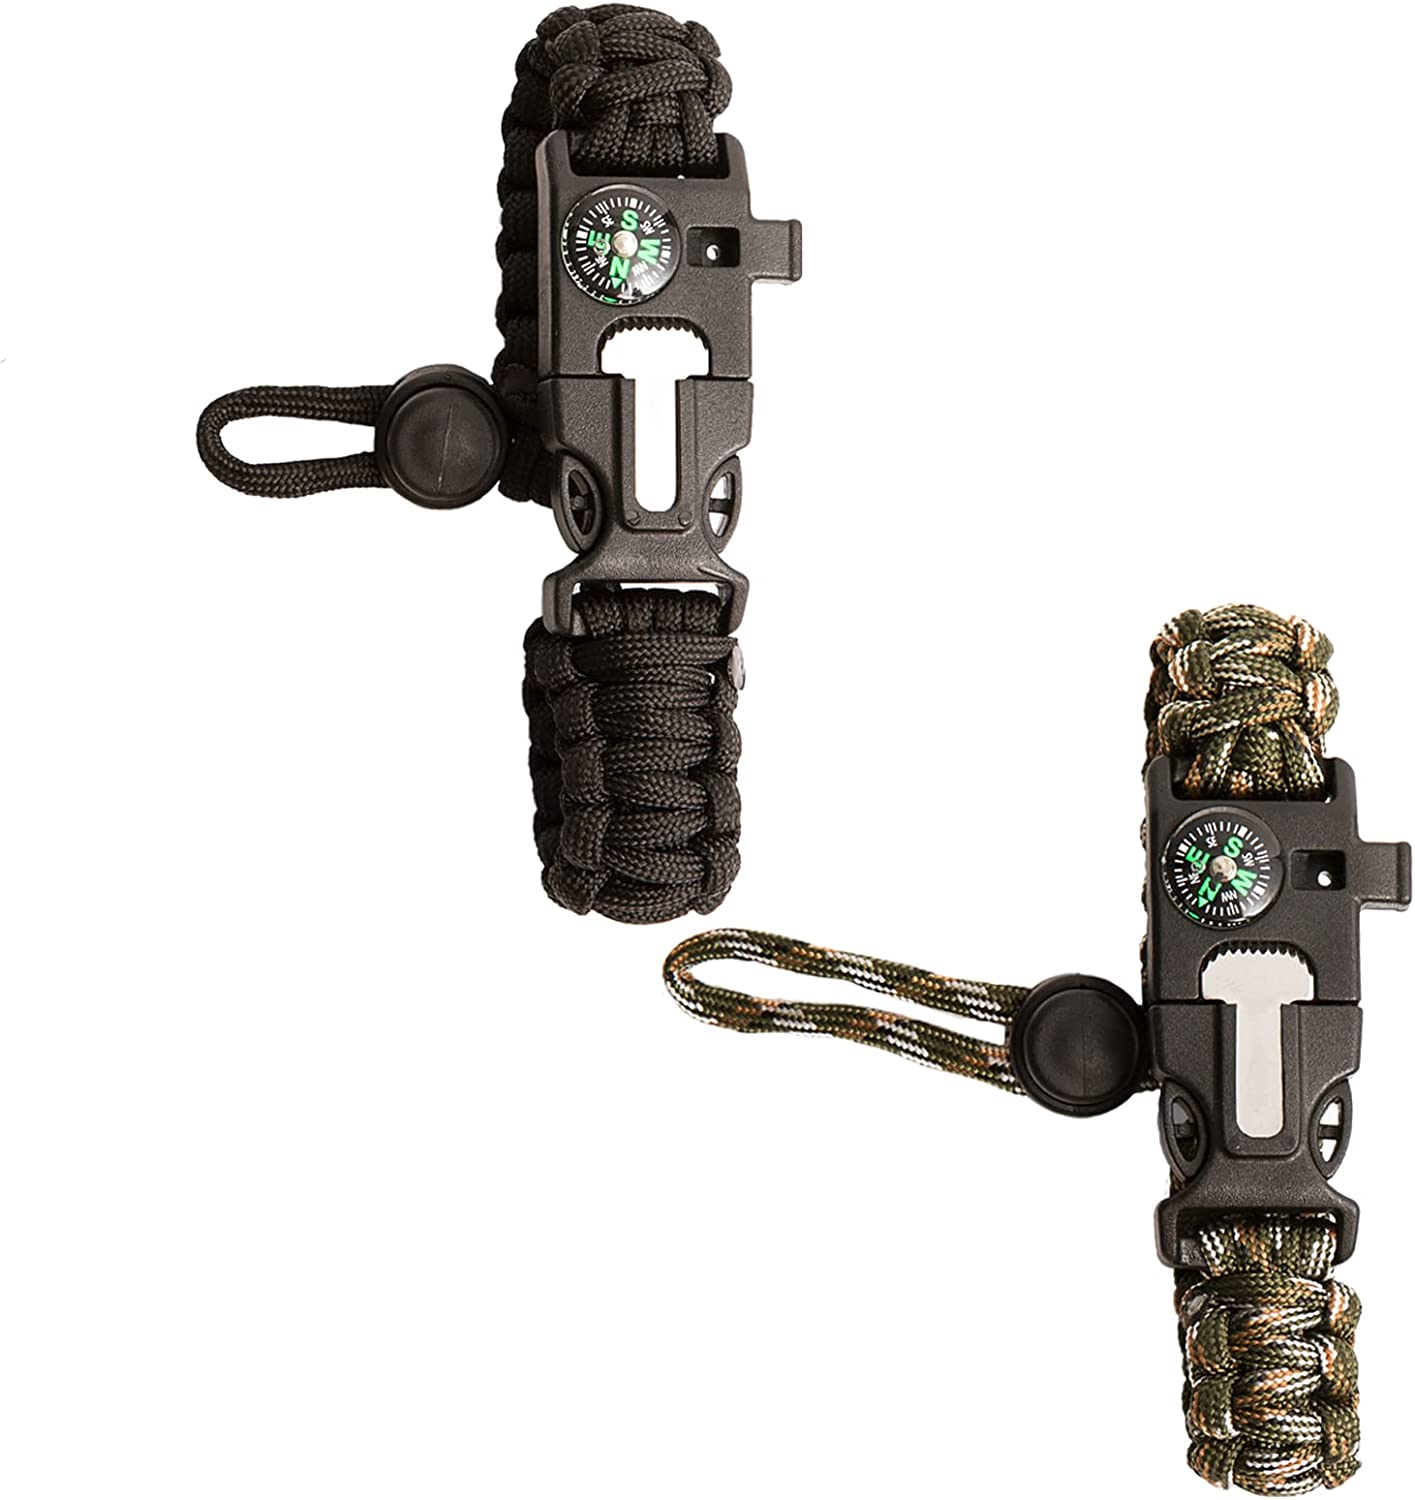 SURVIVAL Paracord Bracelet and 5-in-1 Multi Tool Camping Gea – Bushcraft Survival